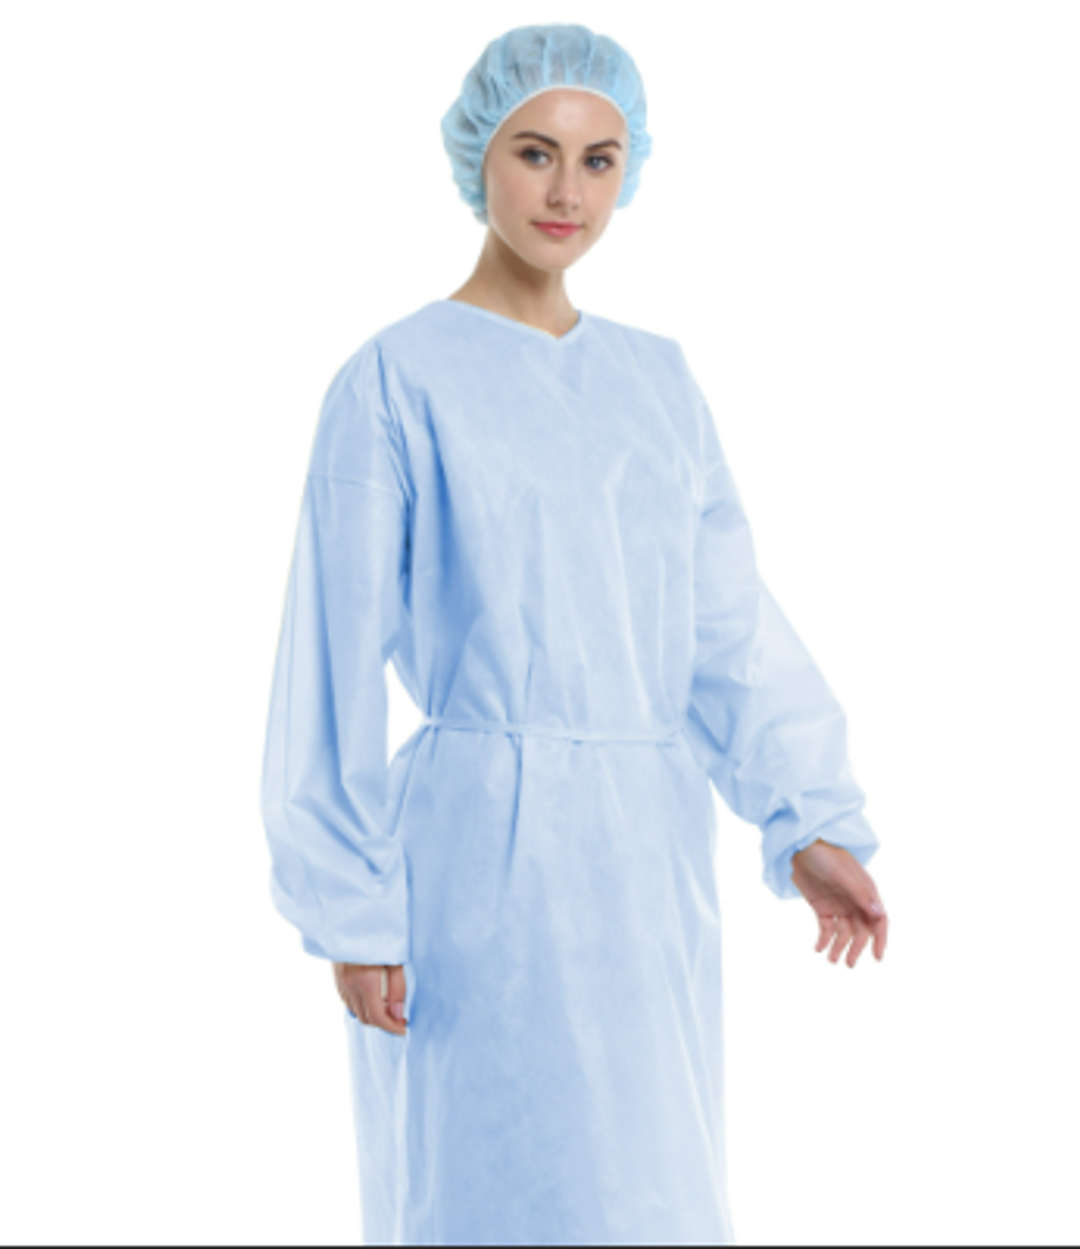 Lomar Isolation Gown